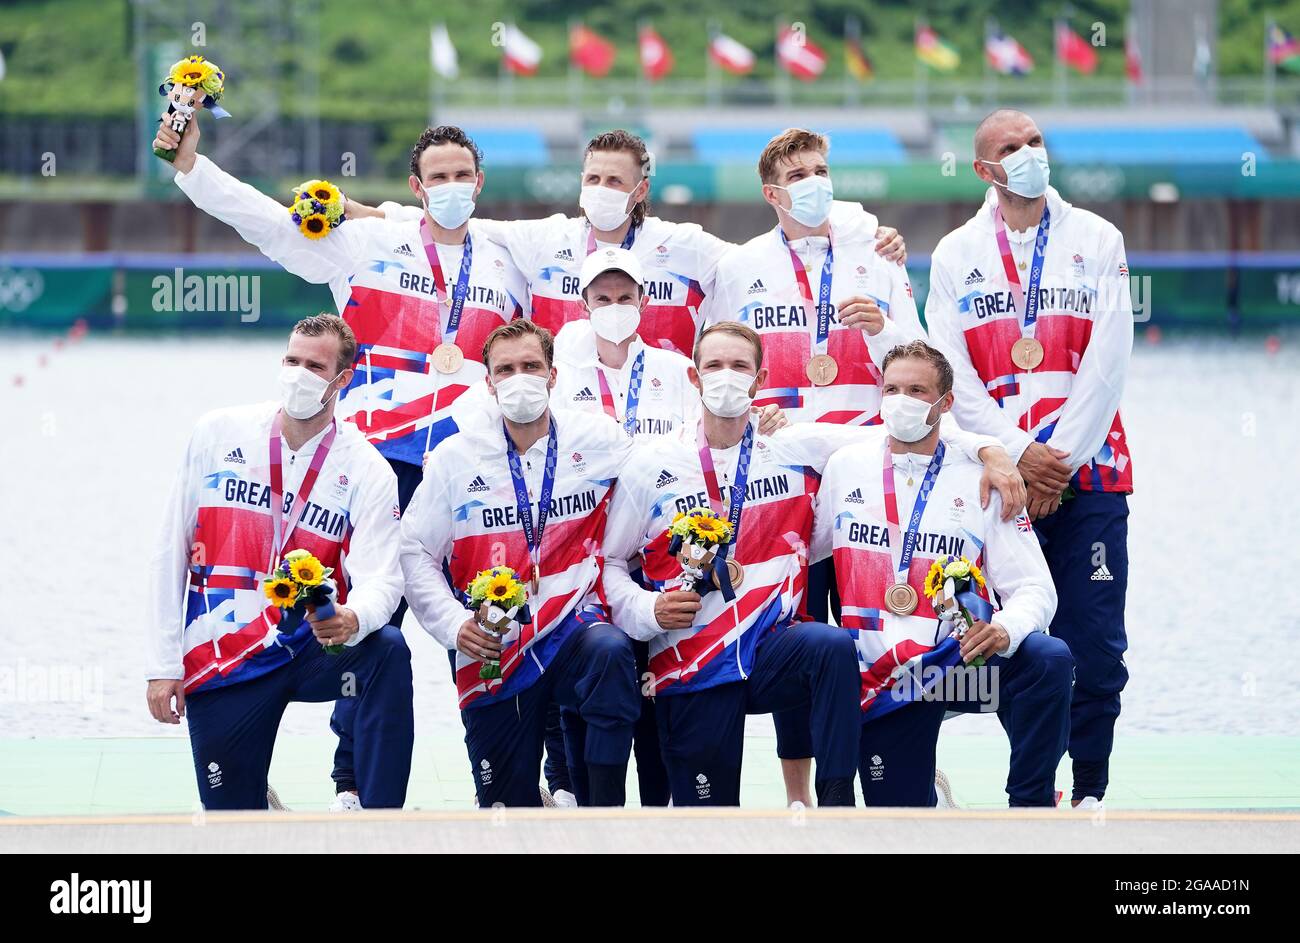 Great Britain's Josh Bugajski, Jacob Dawson, Tom George, Mohamed Sbihi, Charles Elwes, Oliver Wynne-Griffith, James Rudkin, Tom Ford and Henry Fieldman (Cox) receive their Bronze medals for the Men's Eight during the Rowing at the Sea Forest Waterway on the seventh day of the Tokyo 2020 Olympic Games in Japan. Picture date: Friday July 30, 2021. Stock Photo